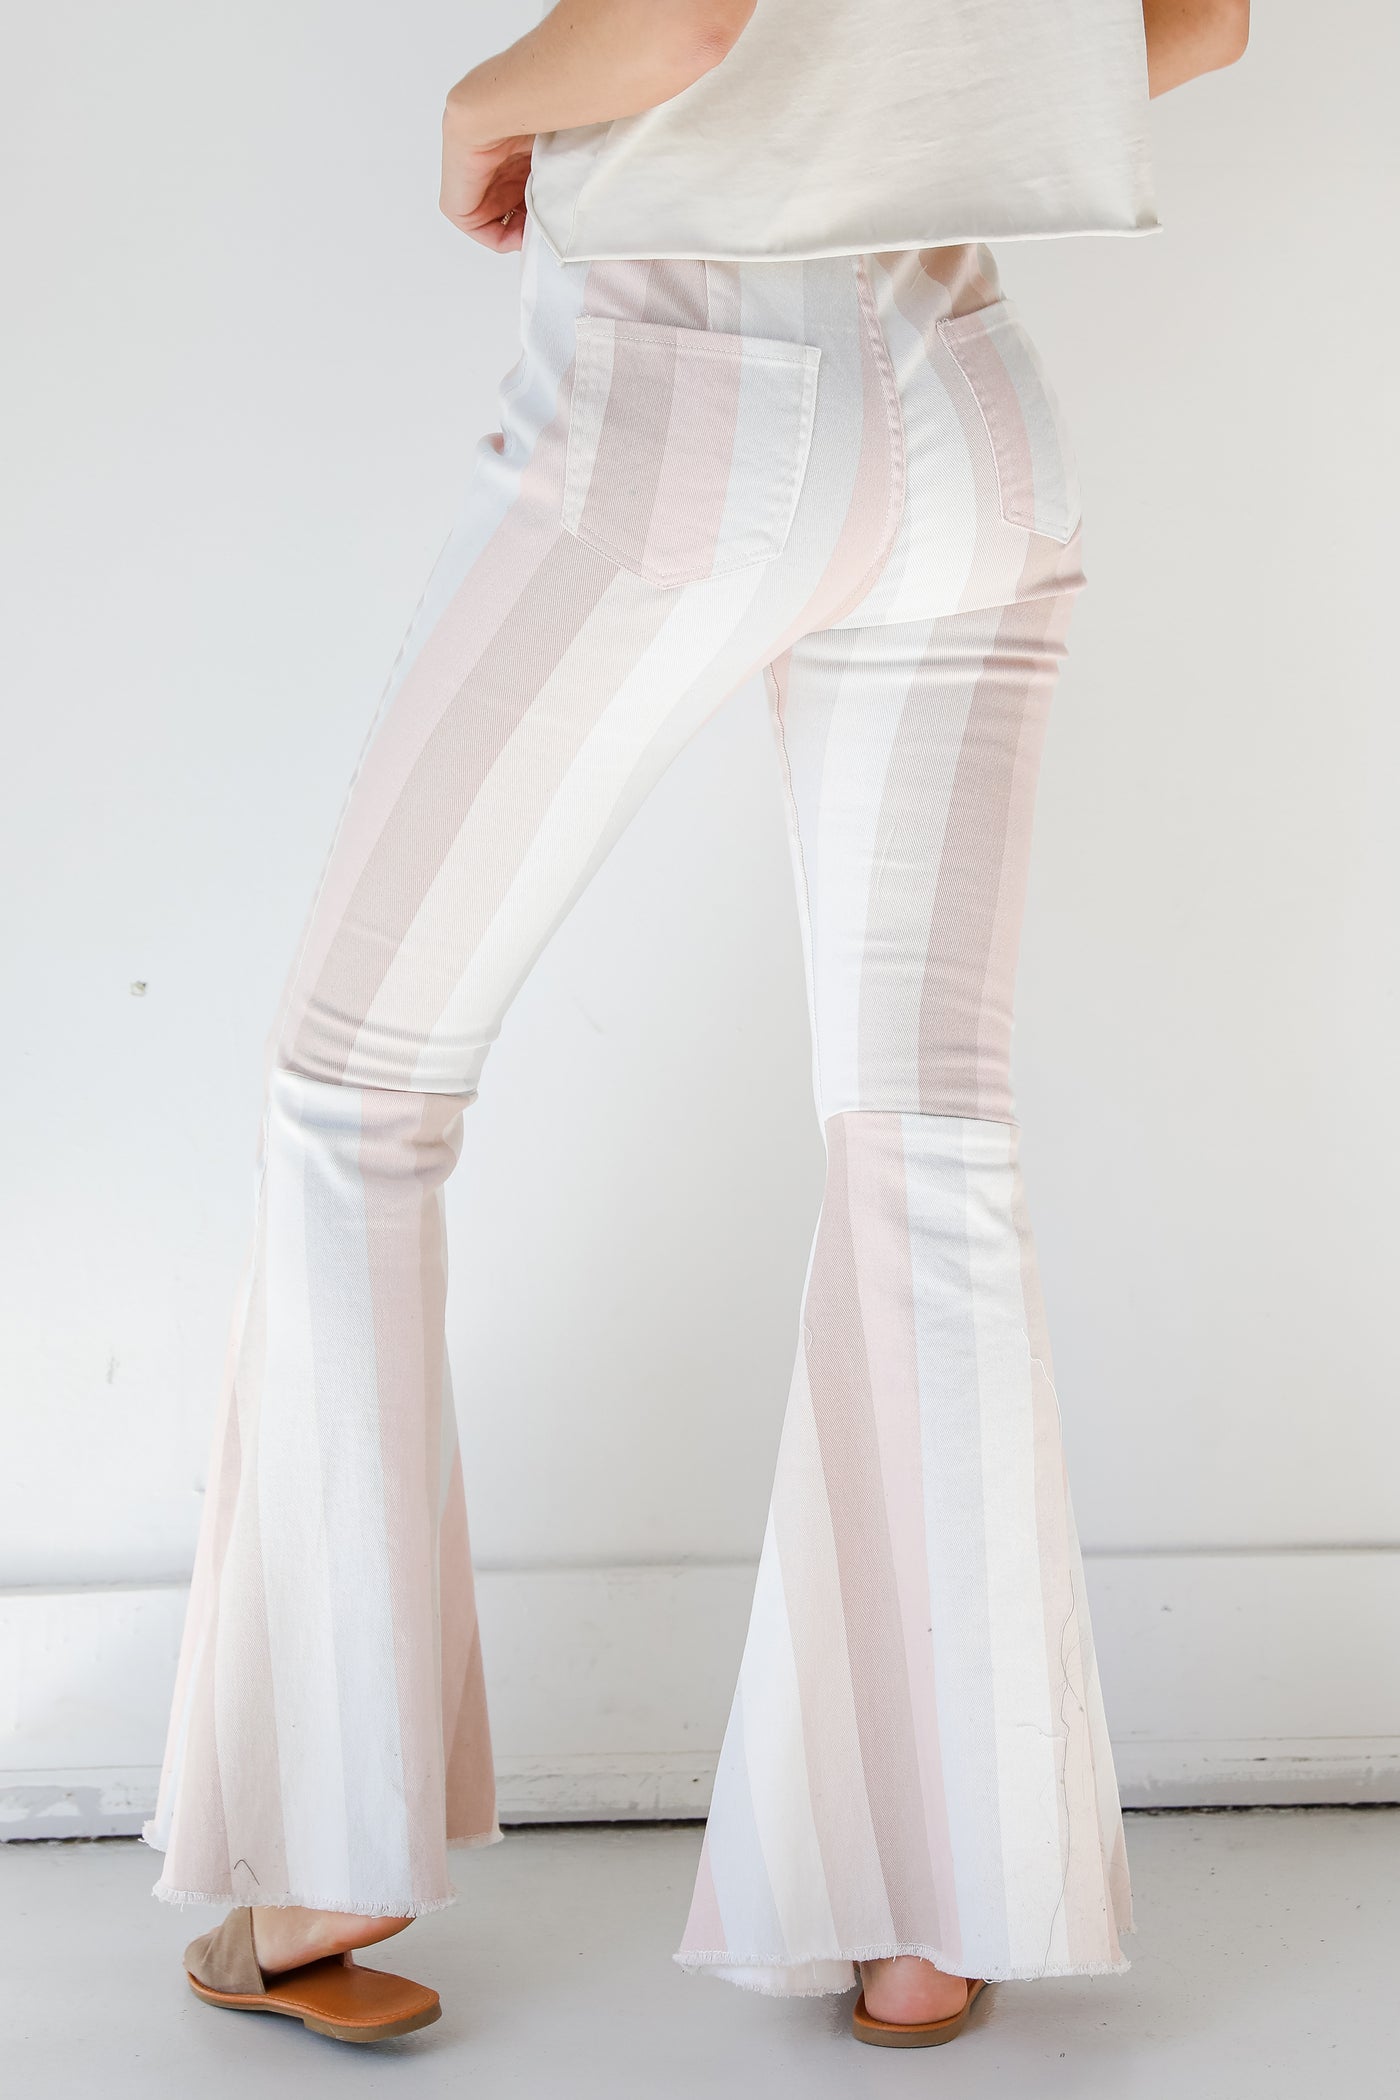 Striped Flare Jeans in blush back view